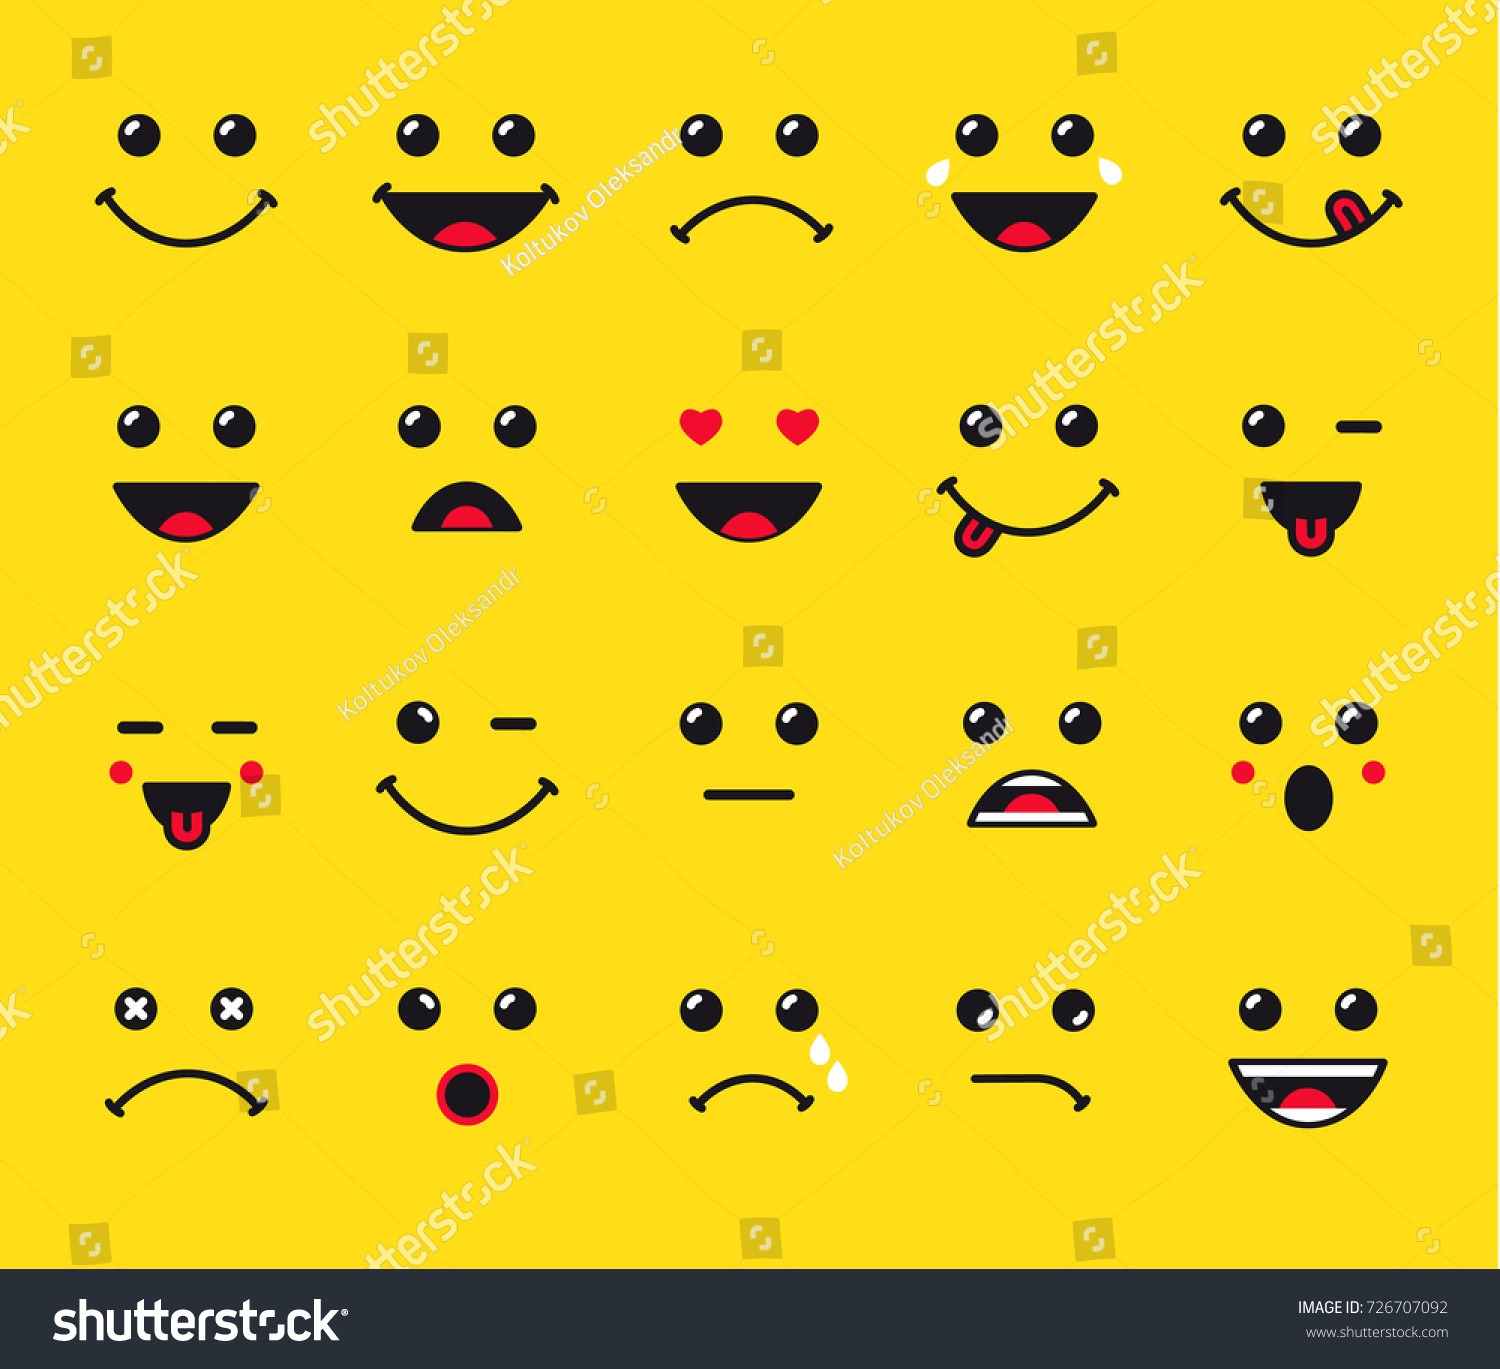 Set of emoticons or emoji illustration line icons. Smile icons line art isolated vector illustration on yellow background. Concept for World Smile Day smiling card or banner #726707092